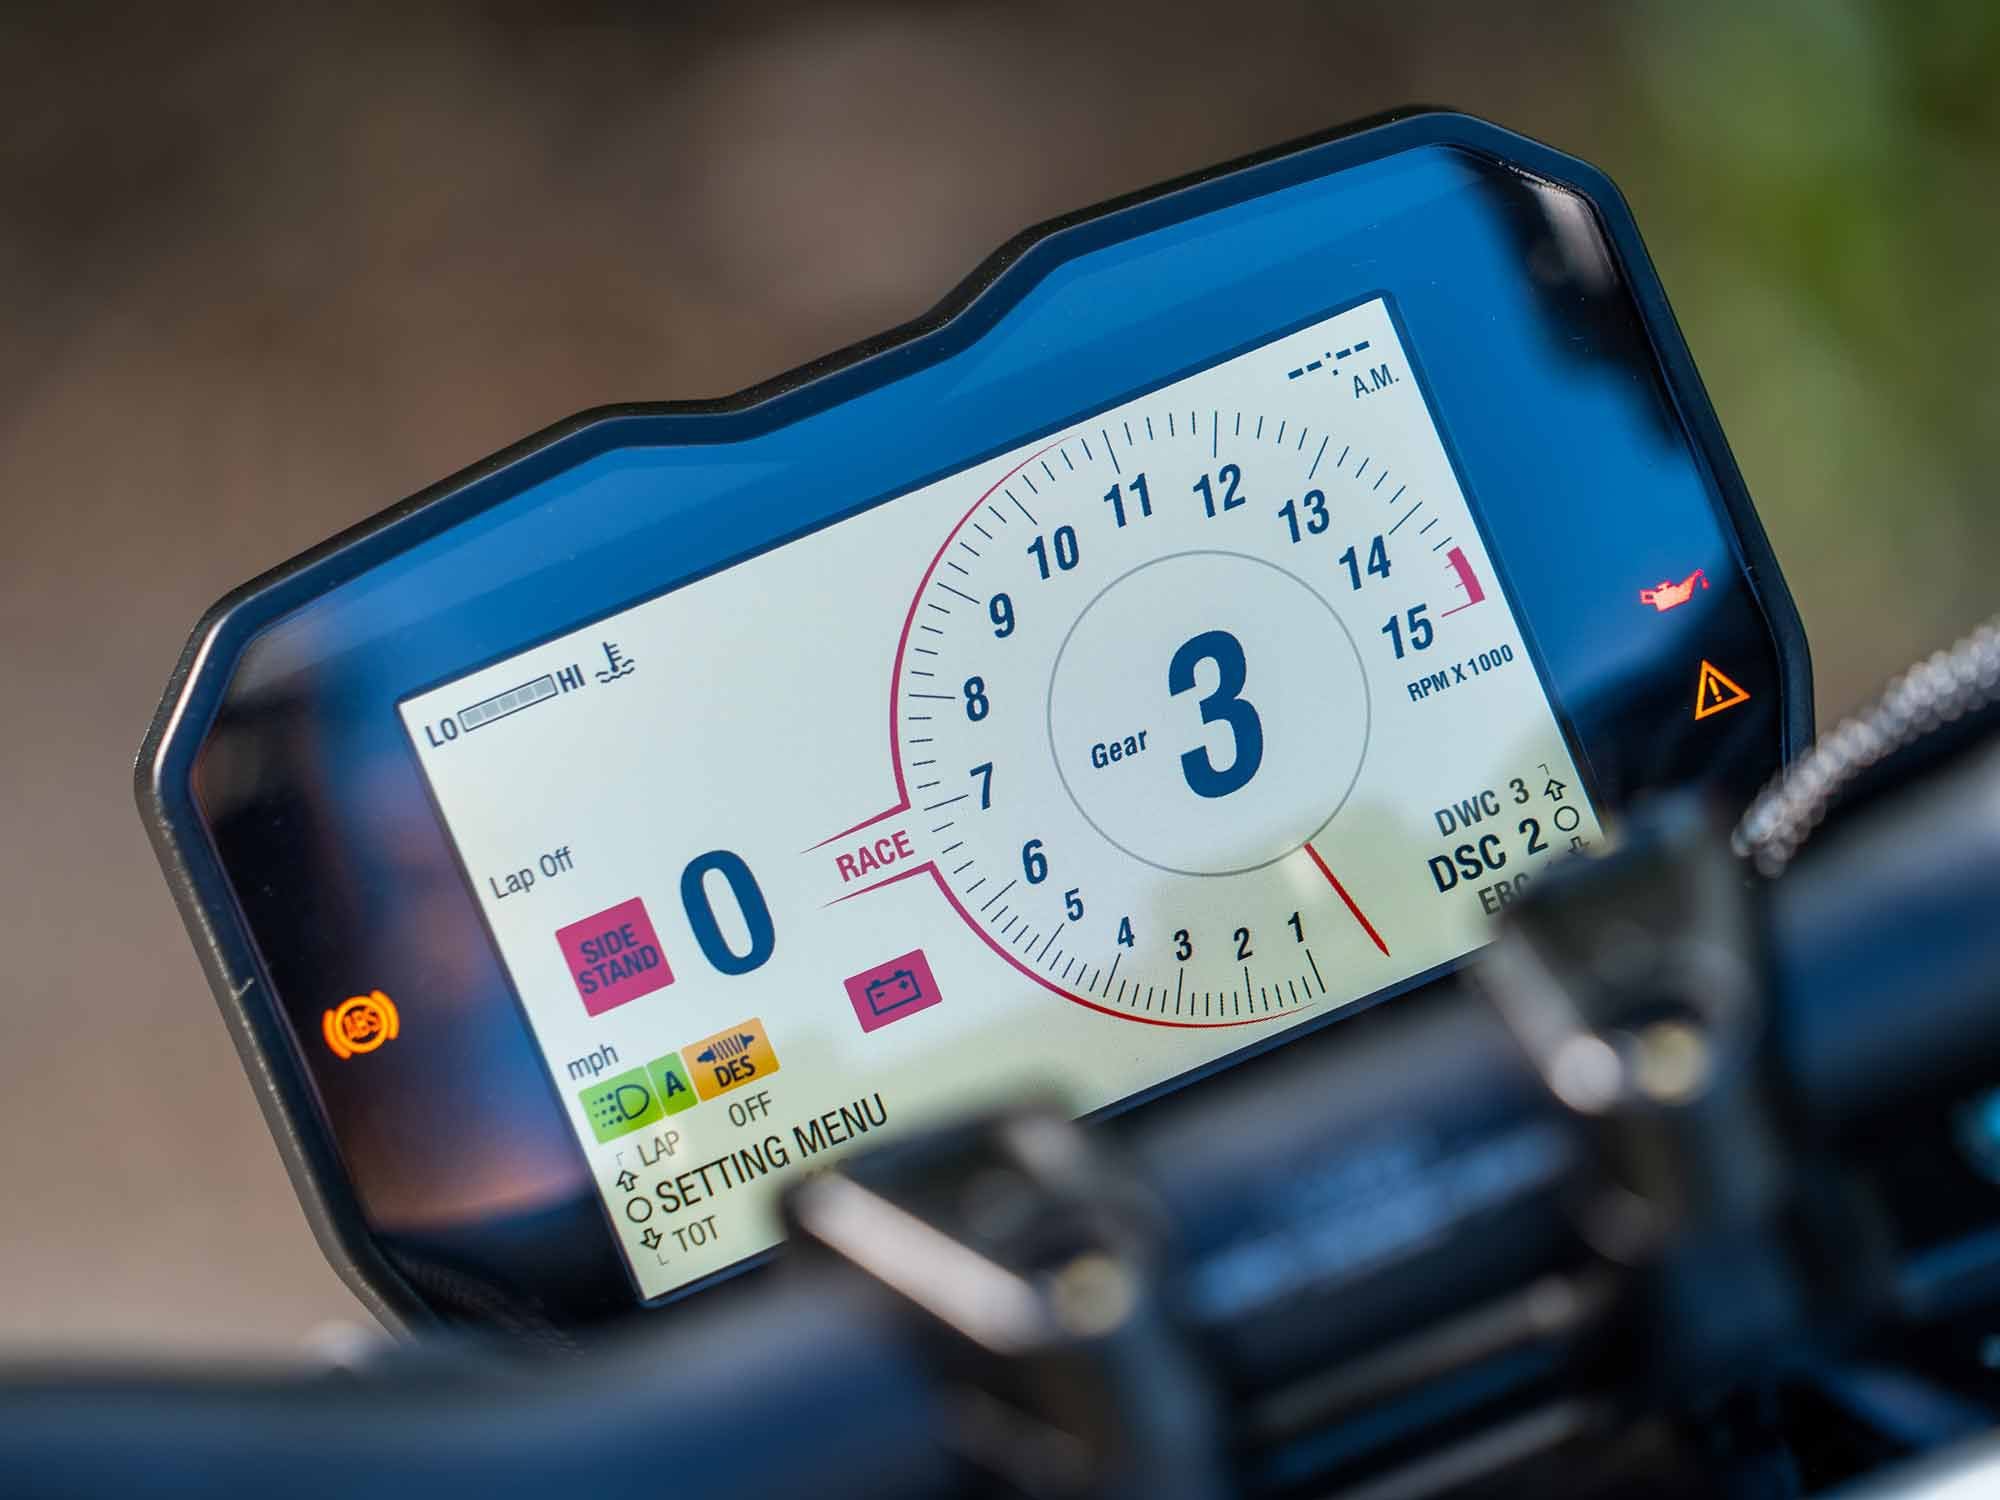 A 5-inch color TFT dash display keeps tabs on machine vitals. The display offers crisp fonts, however the user interface could be improved and the size could be larger compared to rivals in the segment.